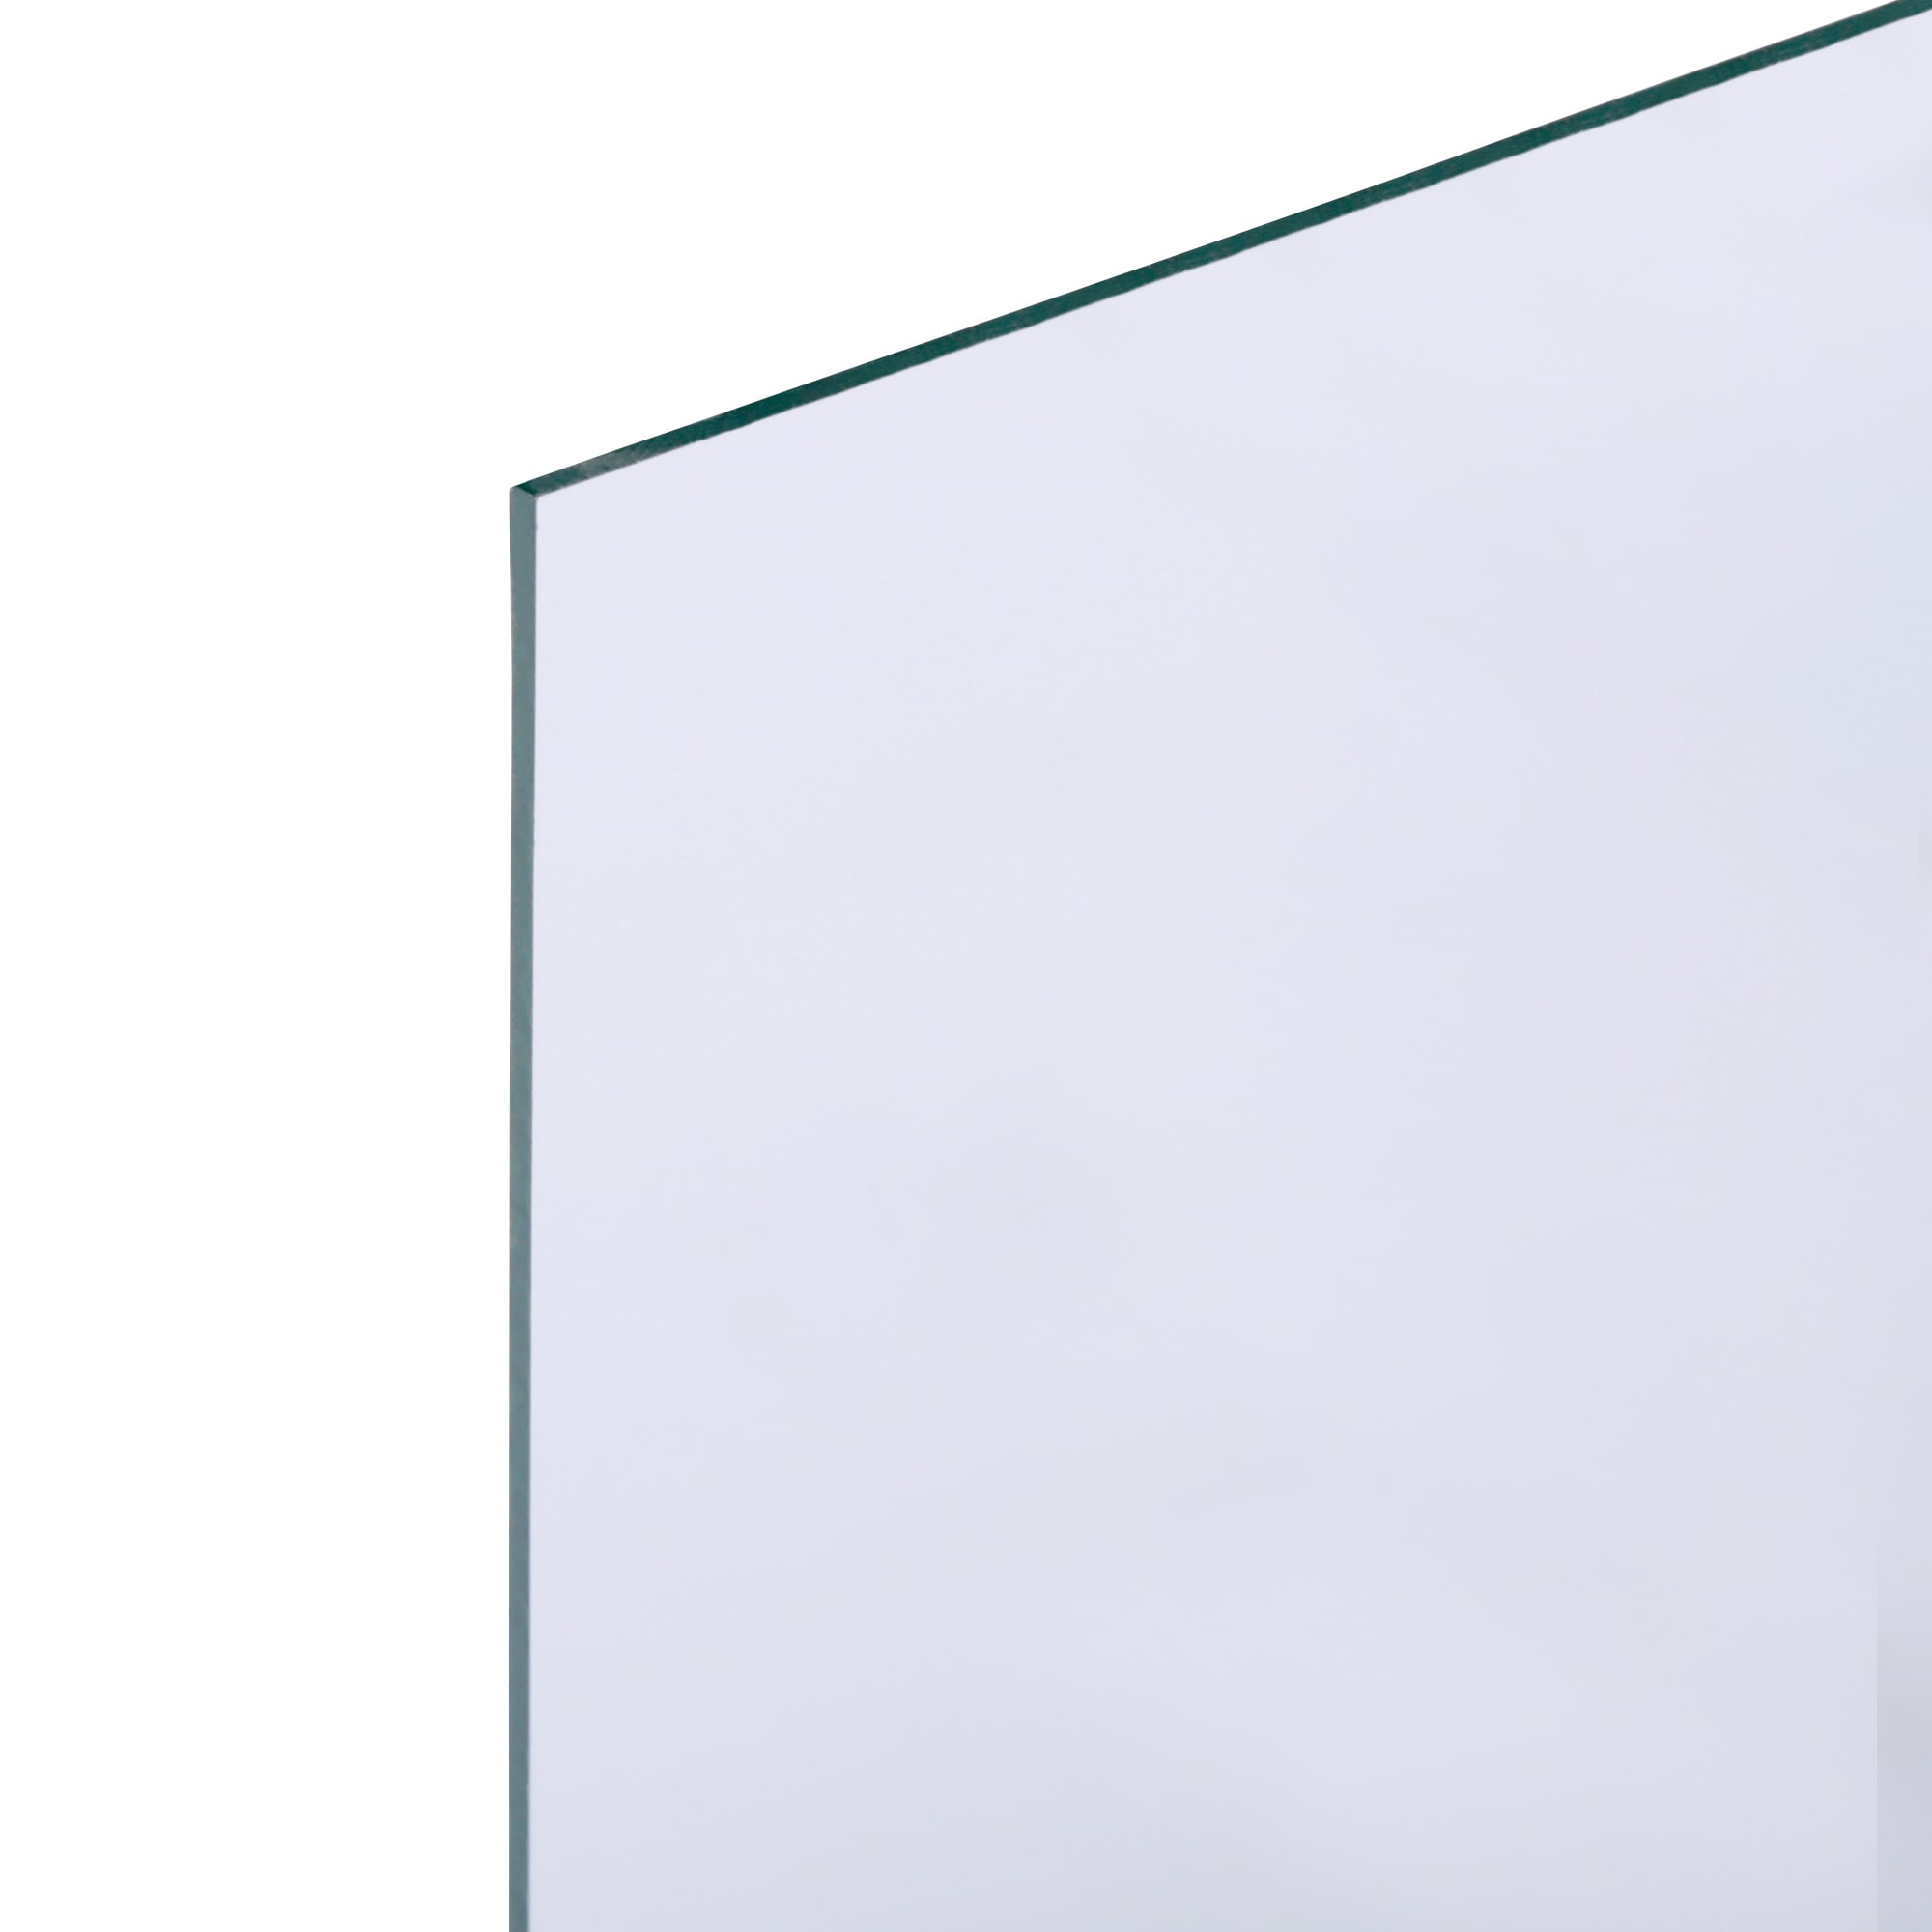 12 Inch 3 mm Thick Square Acrylic Mirror Wedding Party Table